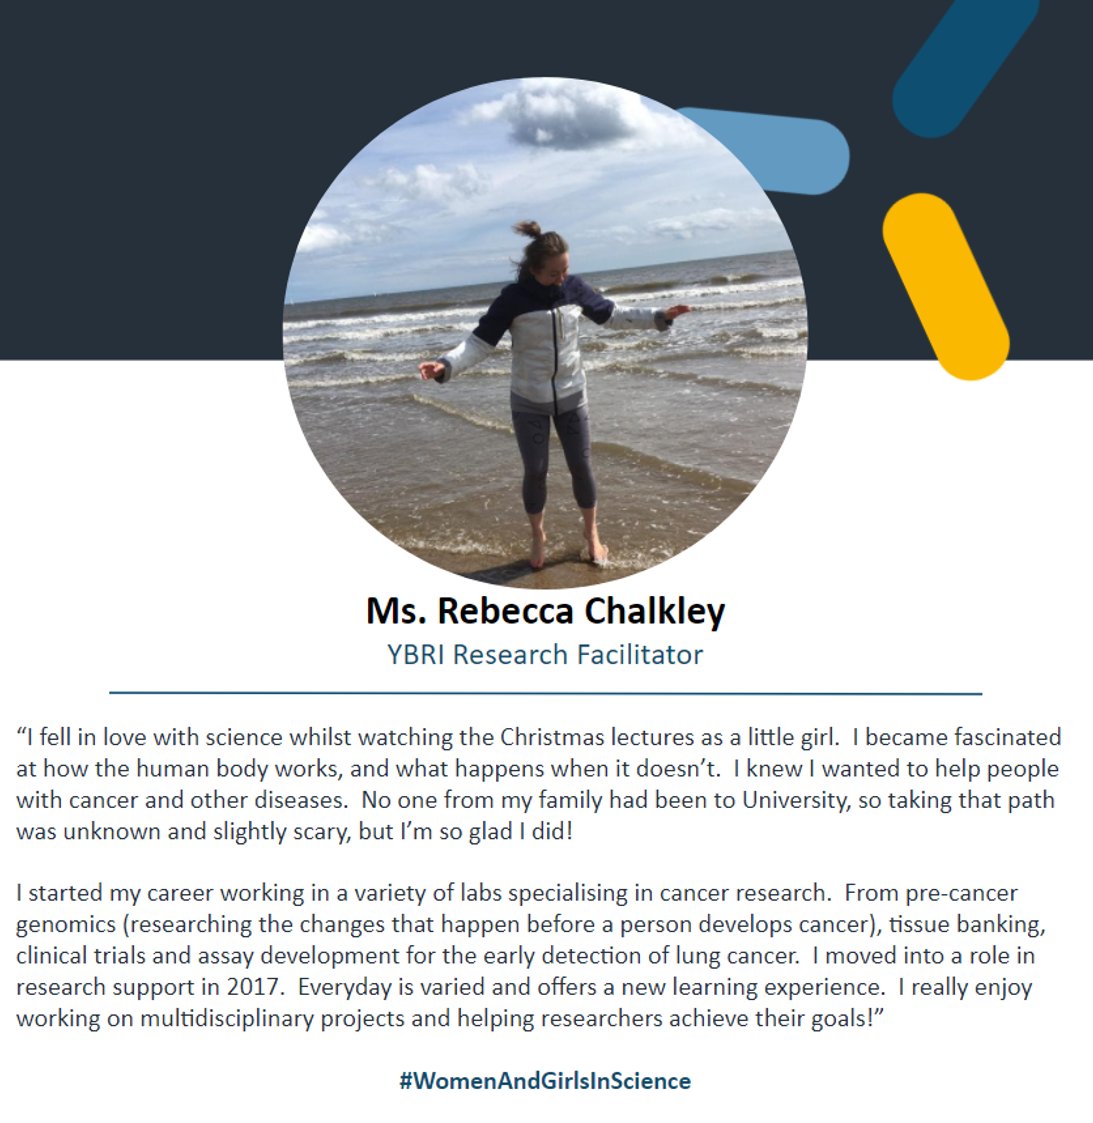 Friday 11 Feb 22 is #WomeninScienceDay celebrating the essential roles that women play in science & technology.

We asked our @YBRI_UoY #ResearchFacilitator Rebecca Chalkley what inspired her to choose a career in #science #researchfacilitation.